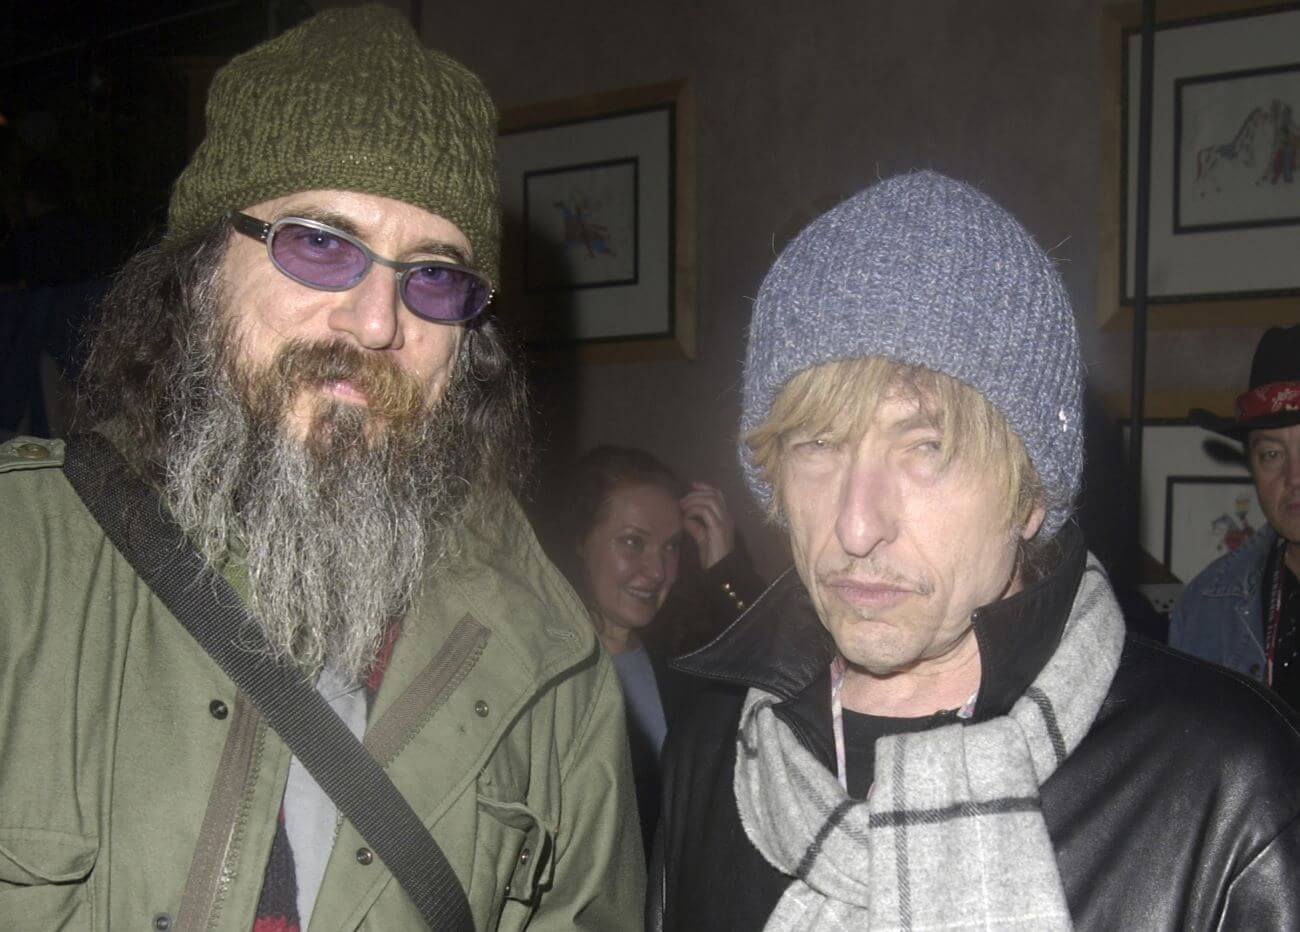 Writer Larry Charles wears sunglasses and a hat while standing with Bob Dylan, who wears a hat, blonde wig, and scarf.